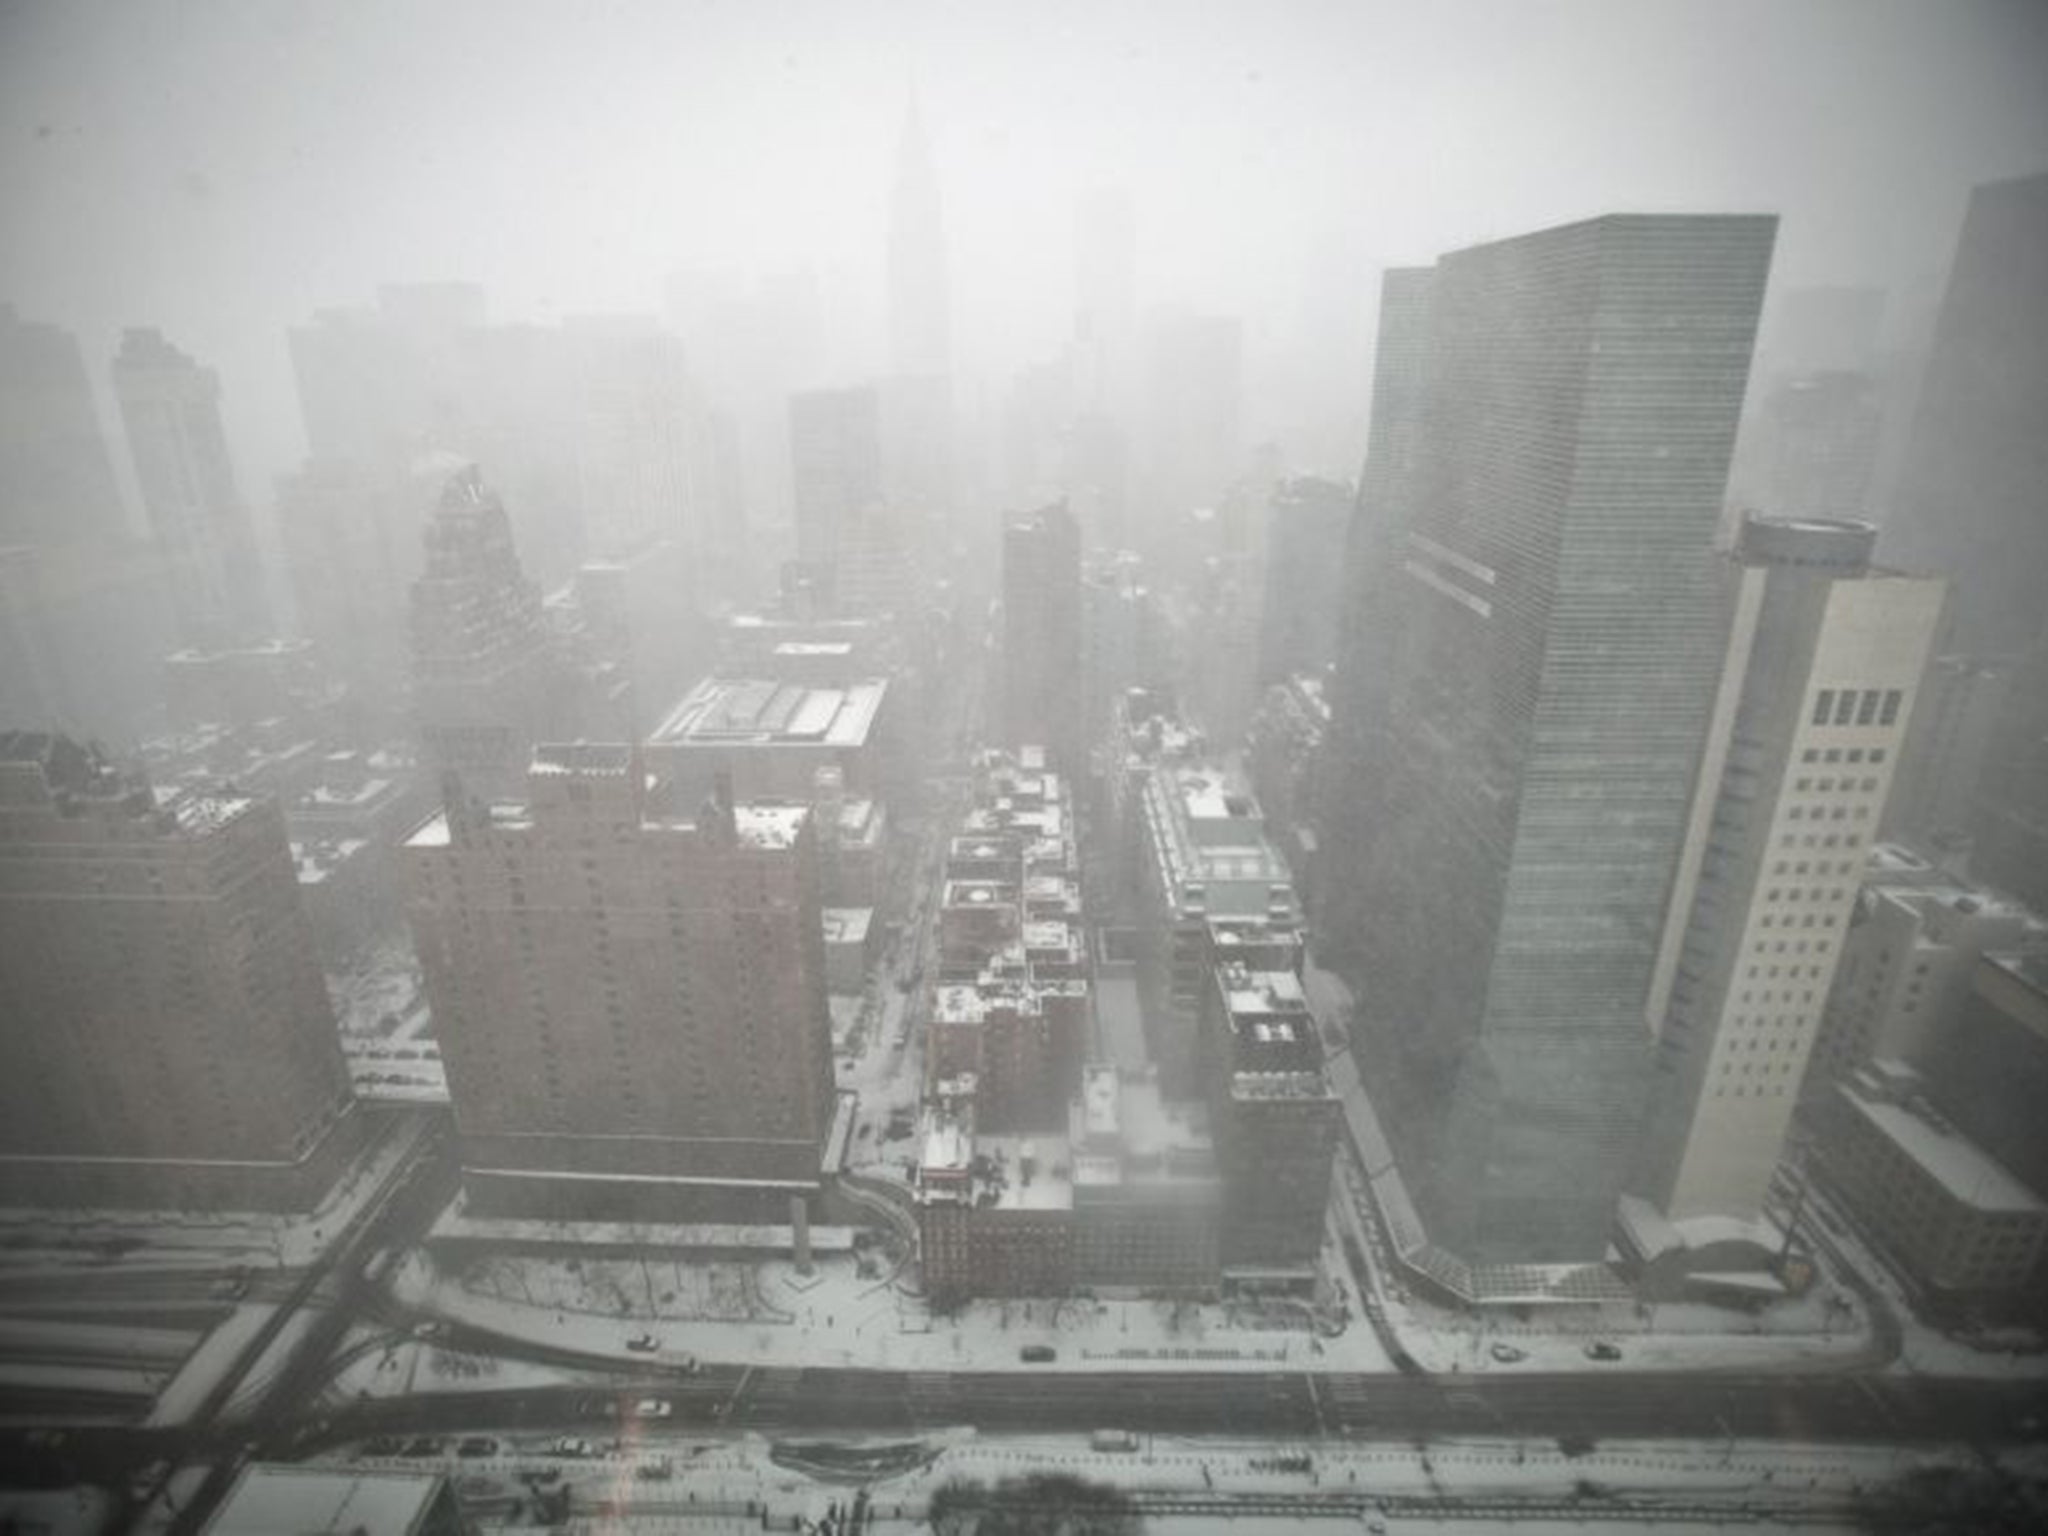 Mid-town Manhattan as pictured from the top of the United Nations building in New York; following a blizzard caused by Storm Juno in January 2015.